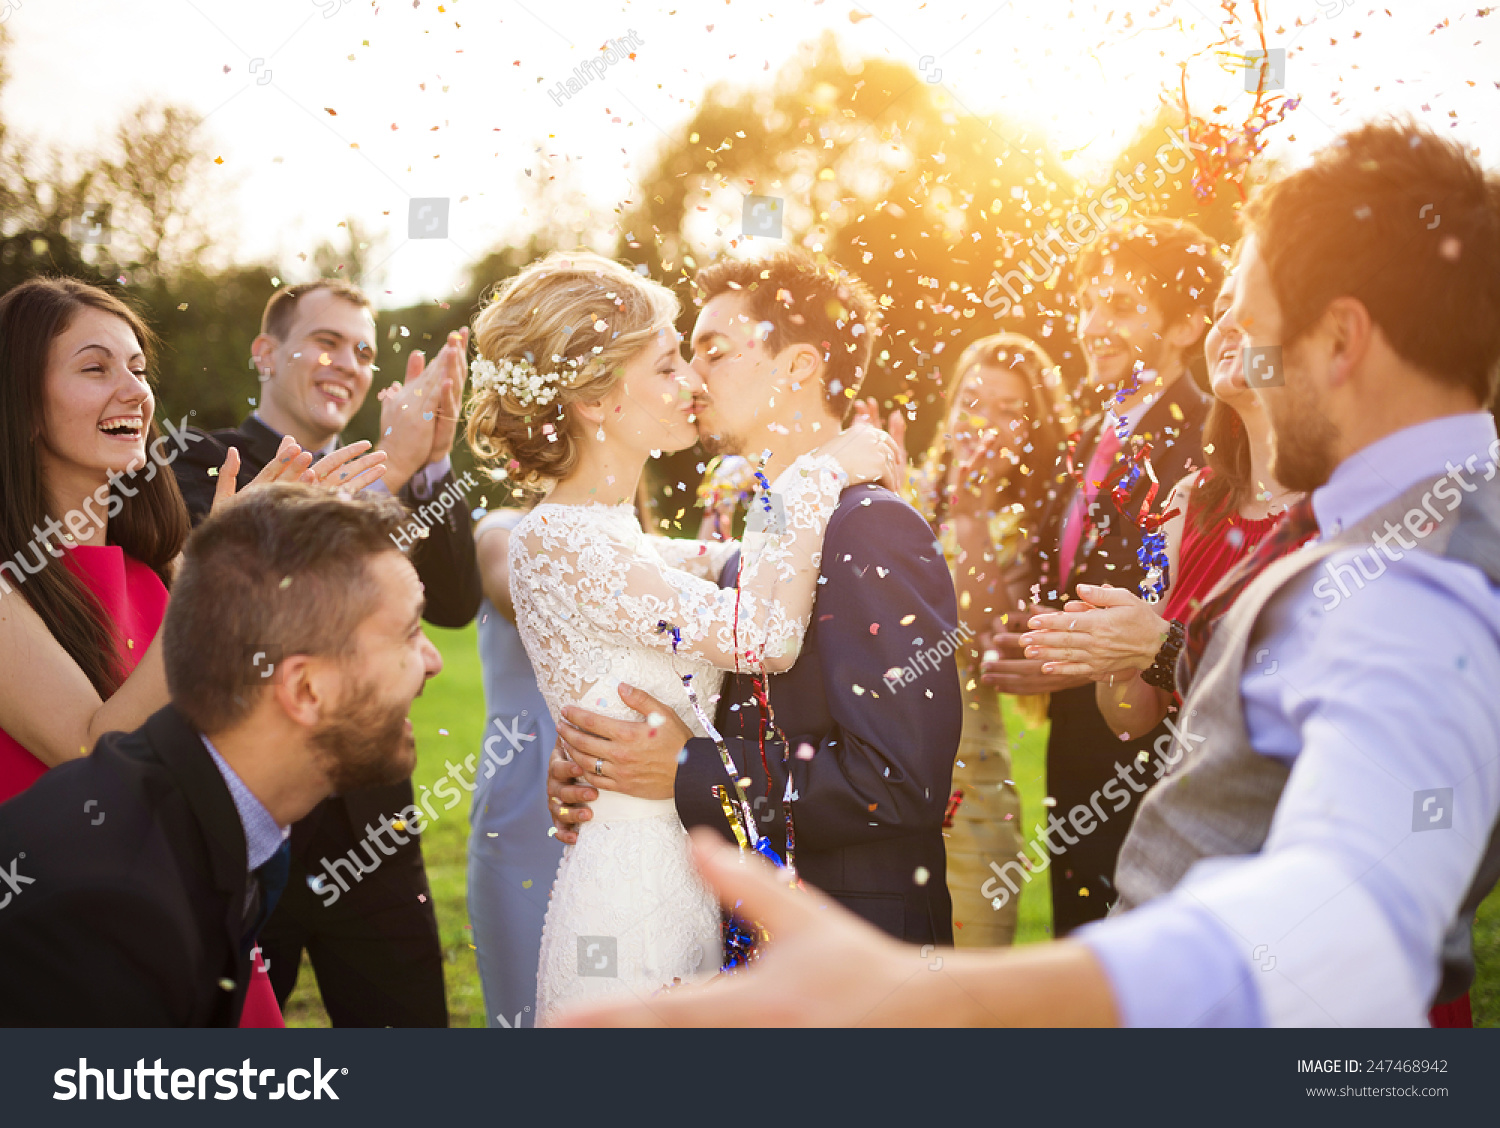 Full length portrait of newlywed couple and their friends at the wedding party showered with confetti in green sunny park #247468942